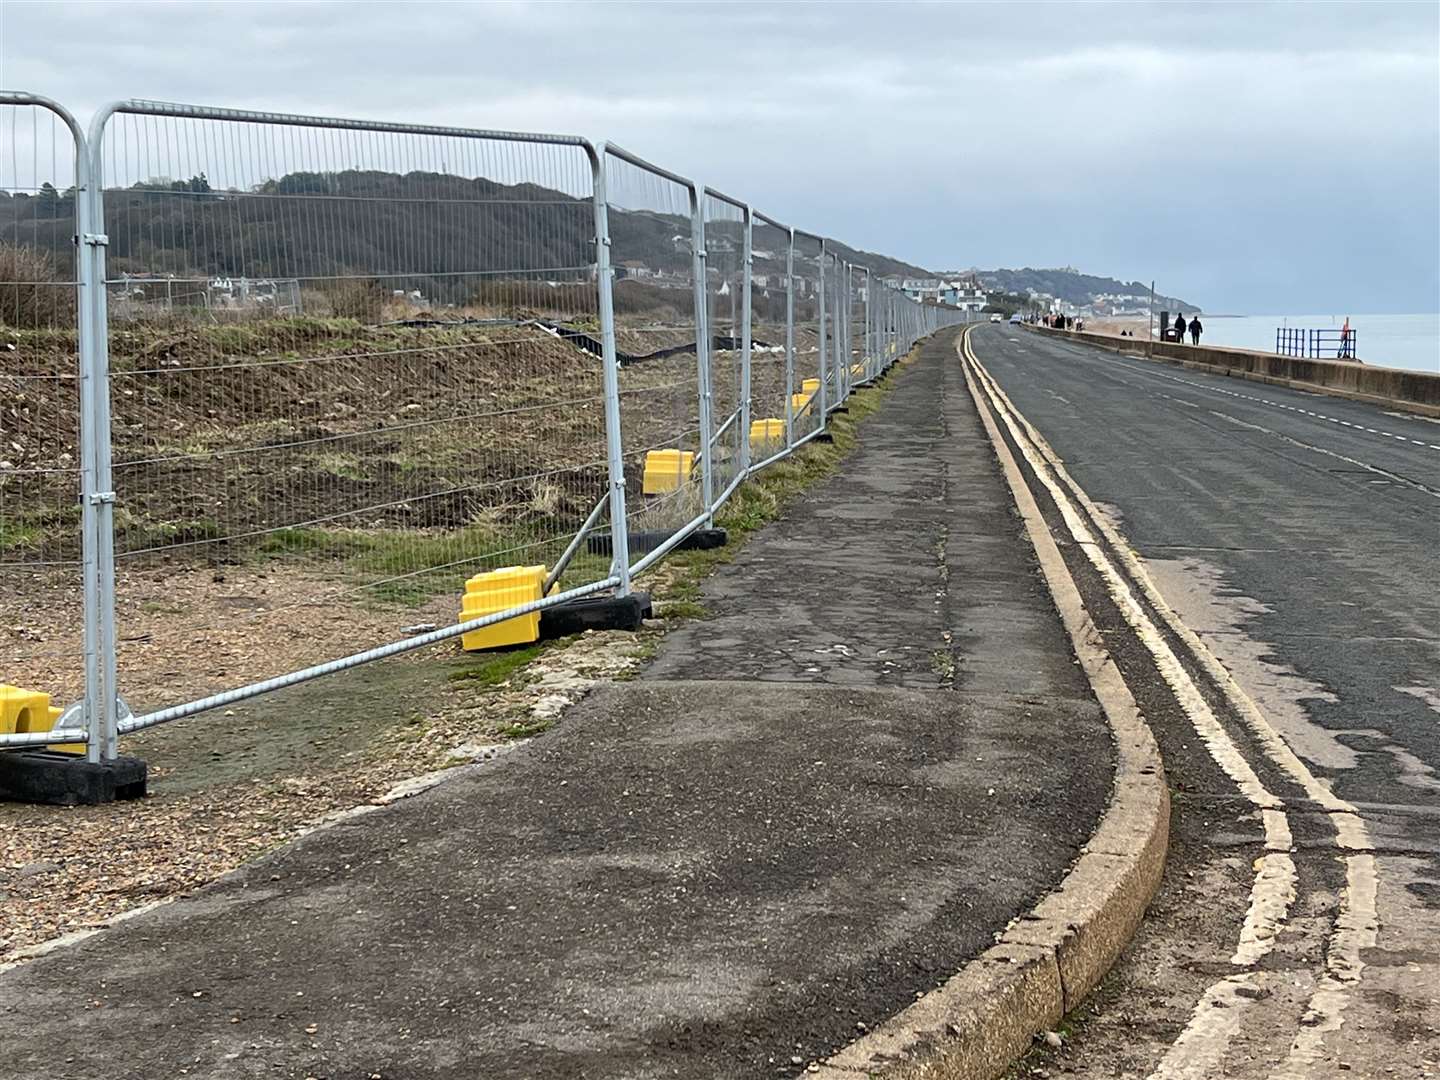 Fencing has gone up around parts of Princes Parade in Hythe where the new development is set to be built. Picture: Barry Goodwin